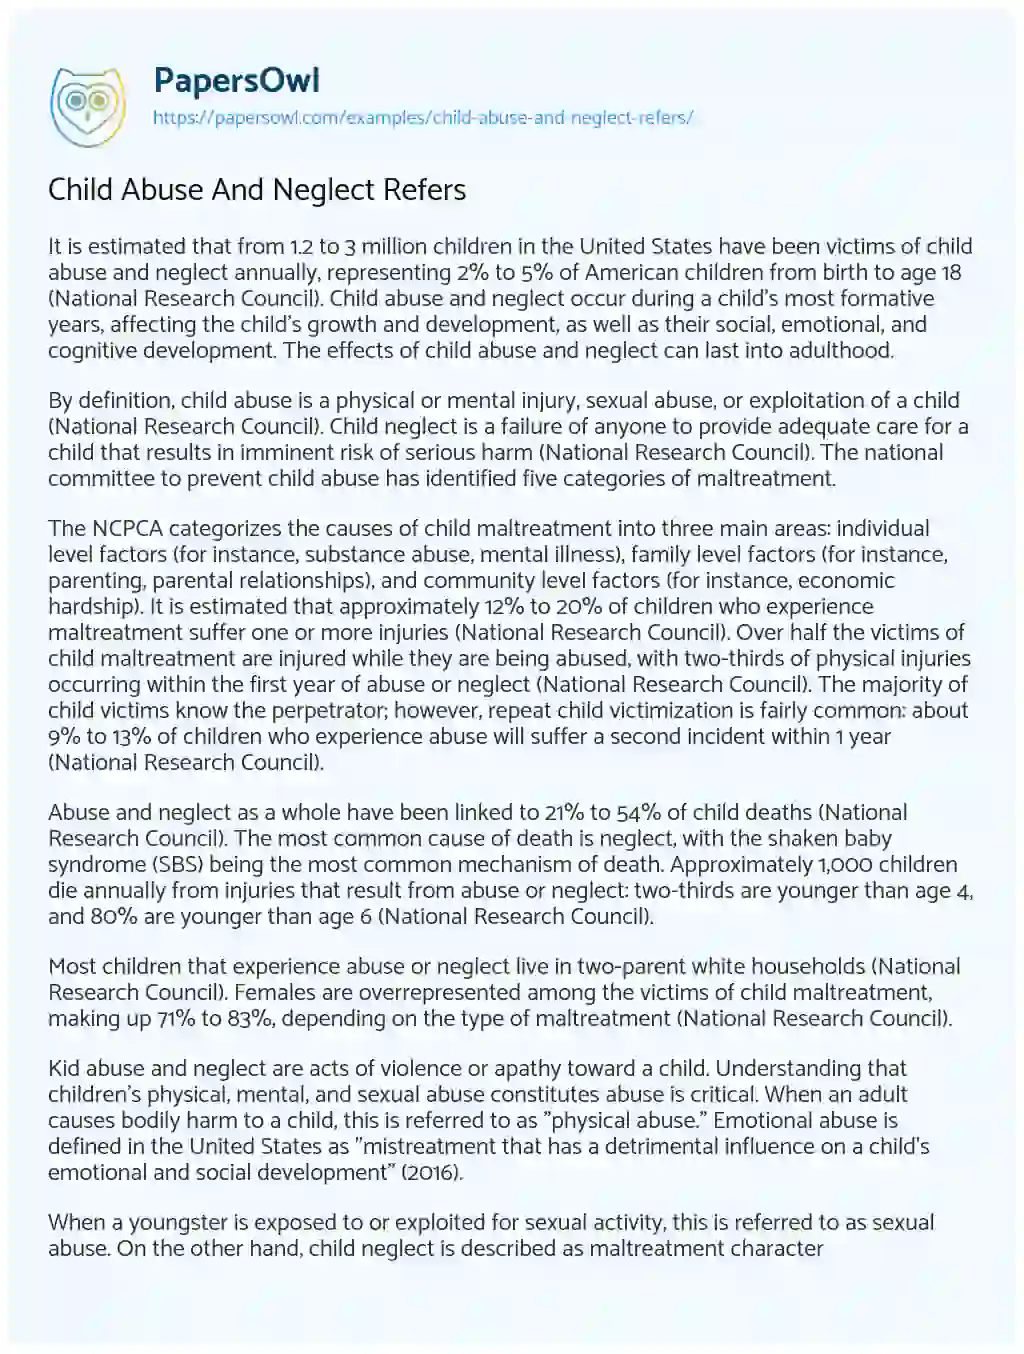 Essay on Child Abuse and Neglect Refers